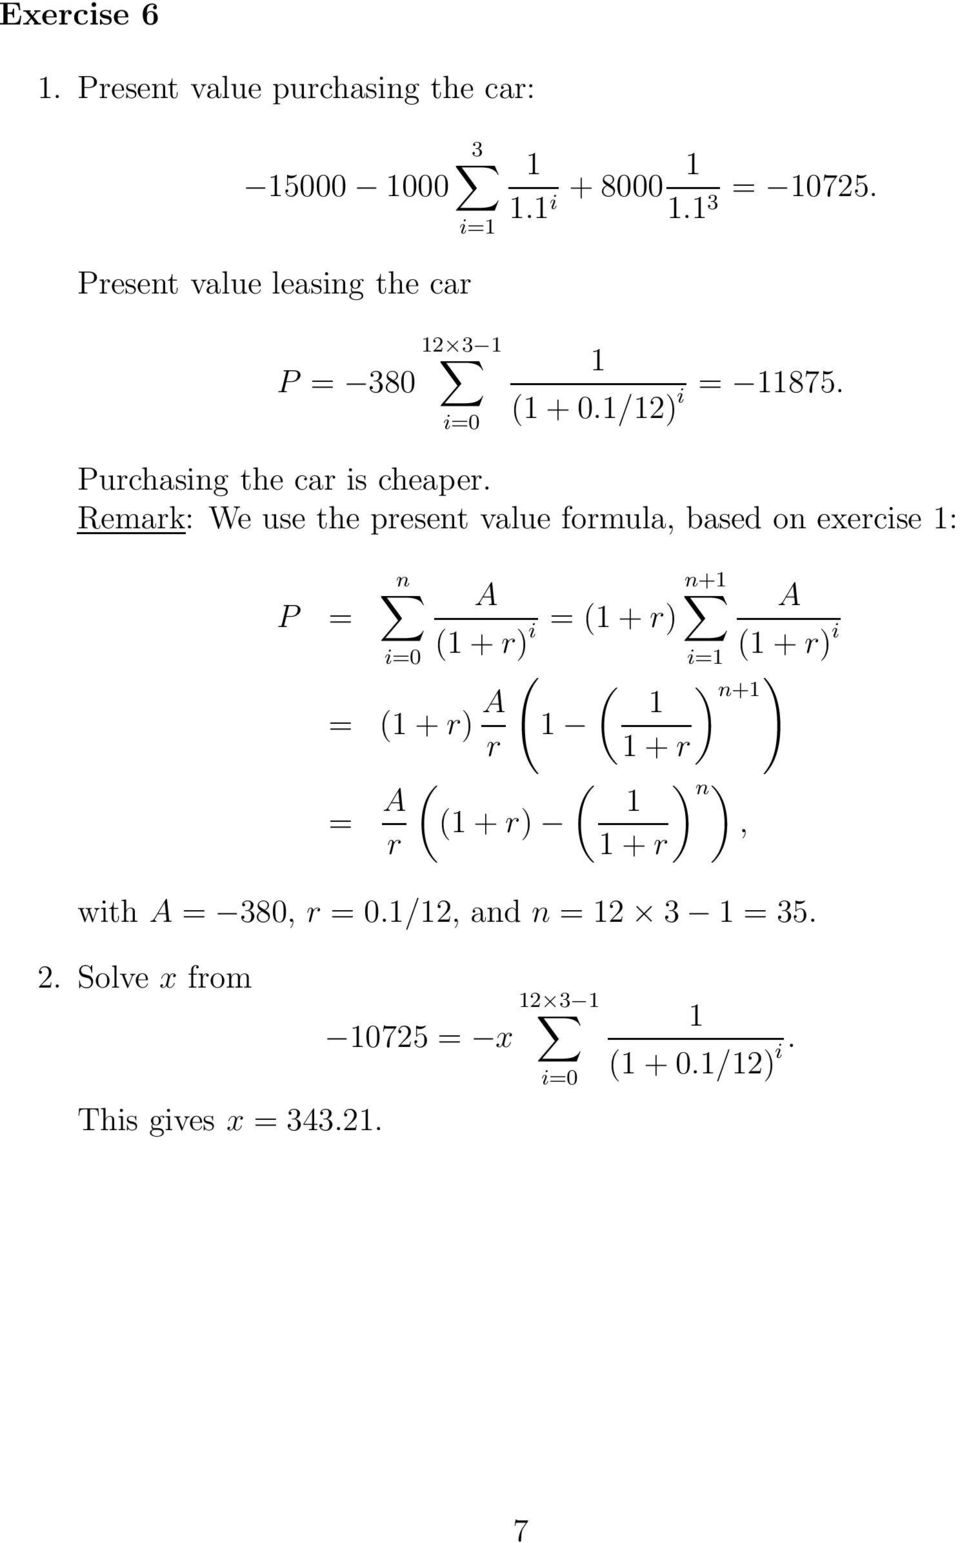 Remark: We use the present value formula, based on exercise 1: n A n+1 A P = i = (1 + r) (1 + r) (1 + r) i ( = (1 + r) A (